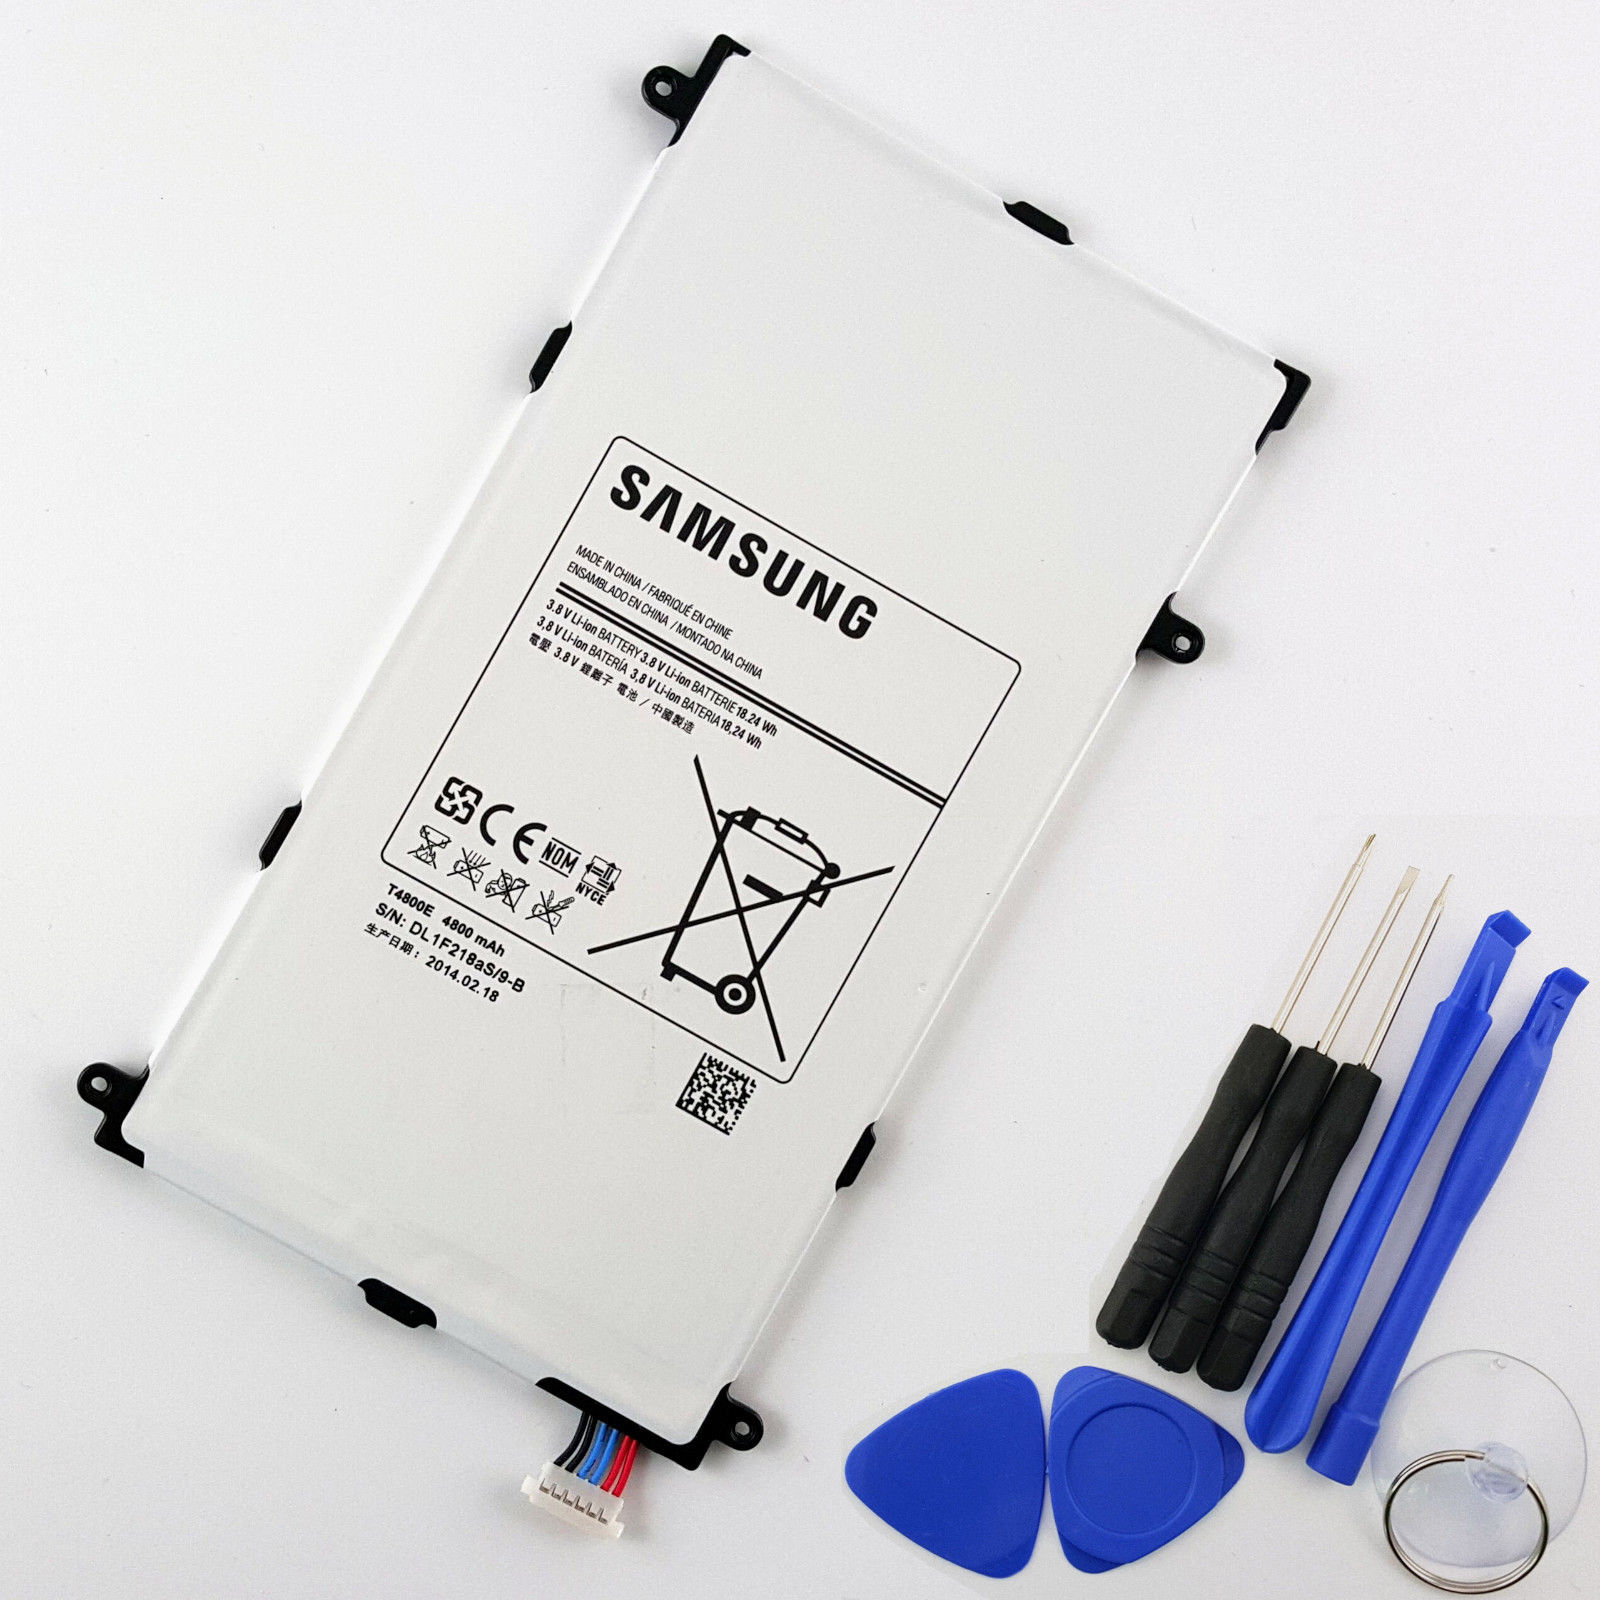 Replacement Samsung Galaxy Tab Pro 8.4 battery